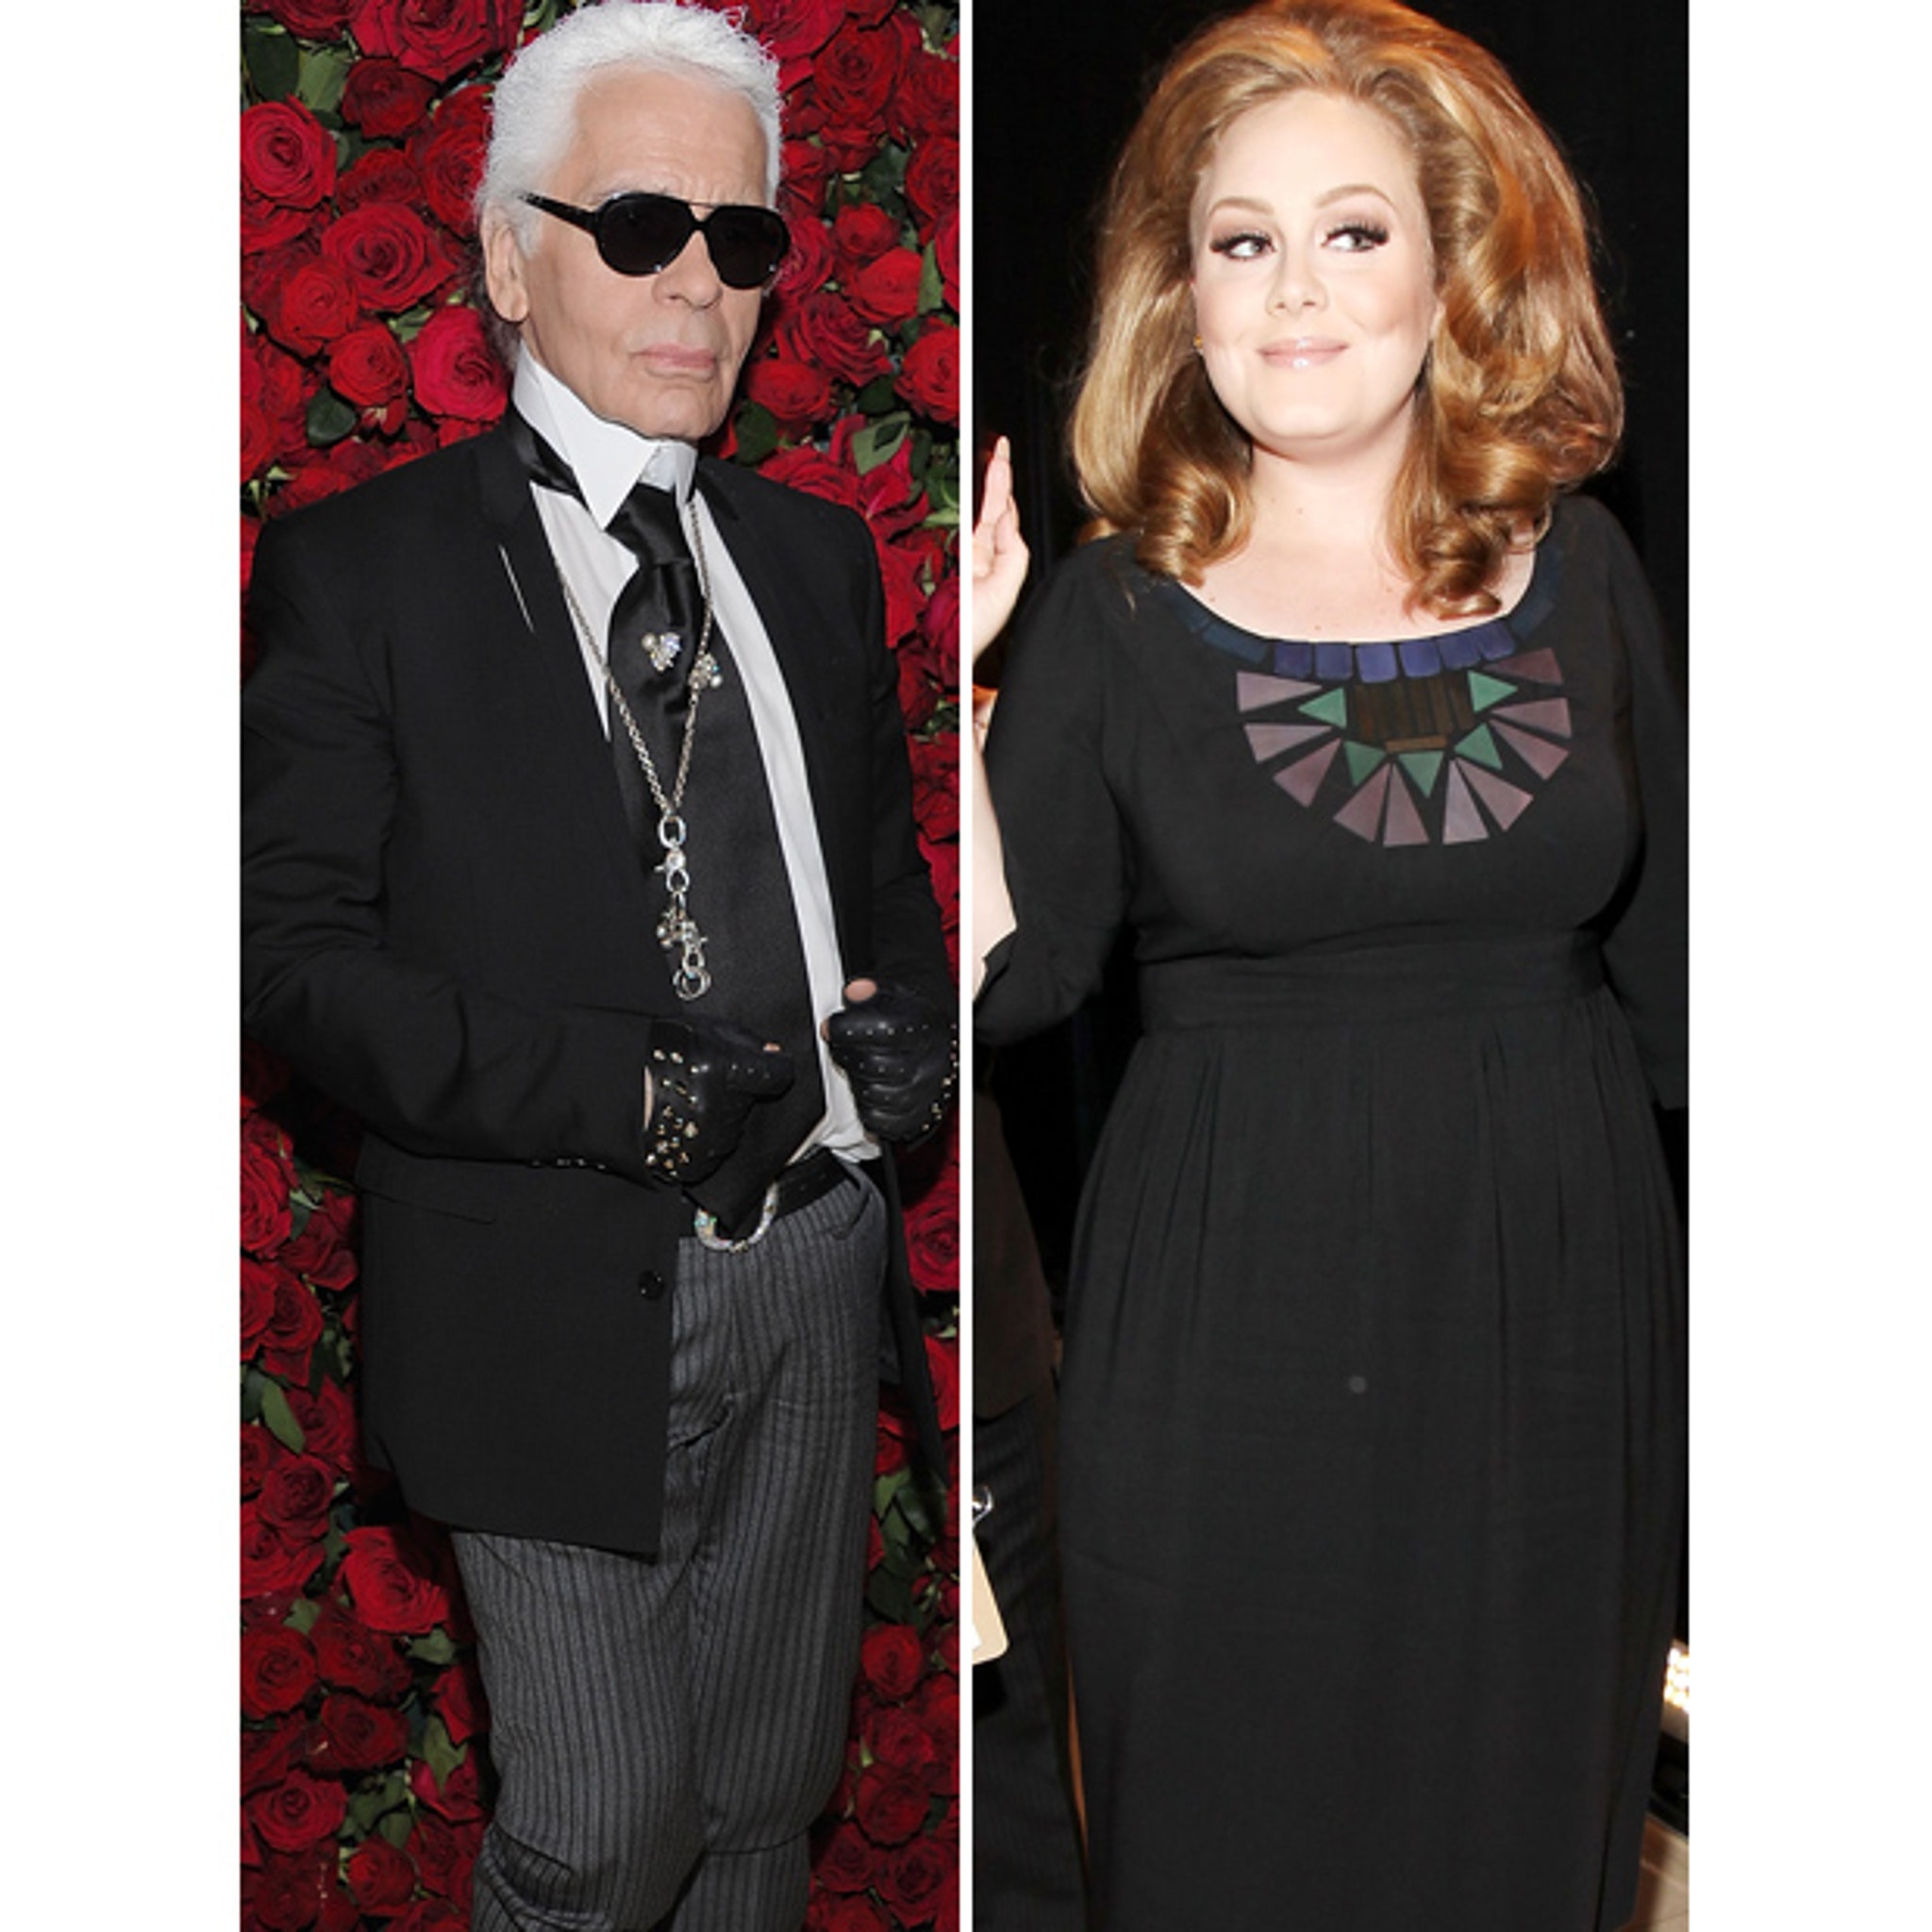 Adele Too Fat, Says Karl Lagerfeld, but That's Not All